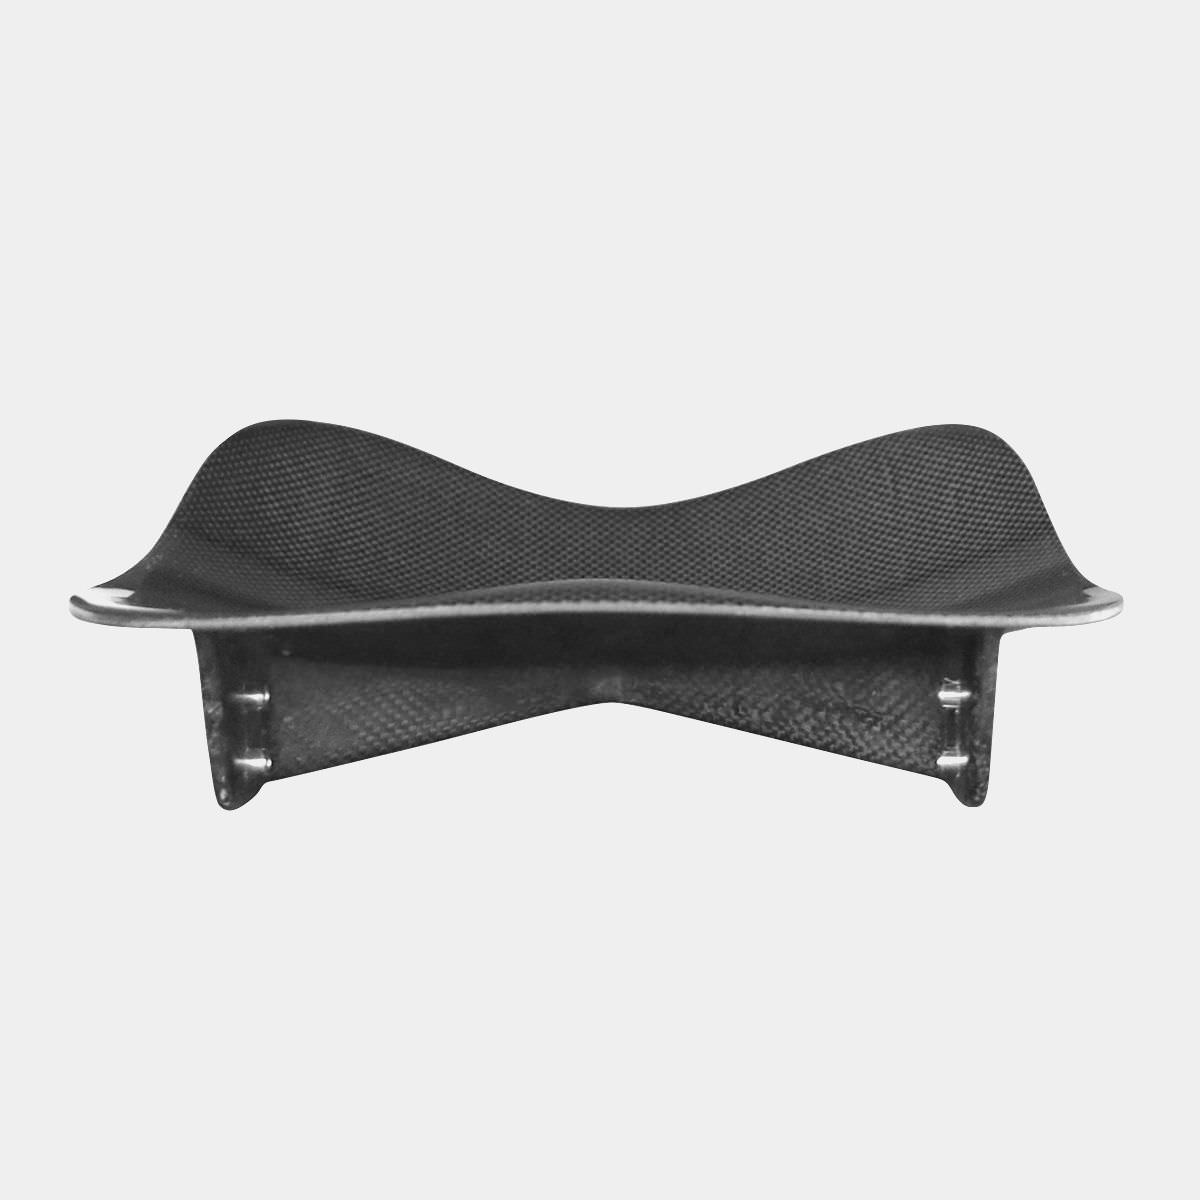 Nelo Ultra low seat front